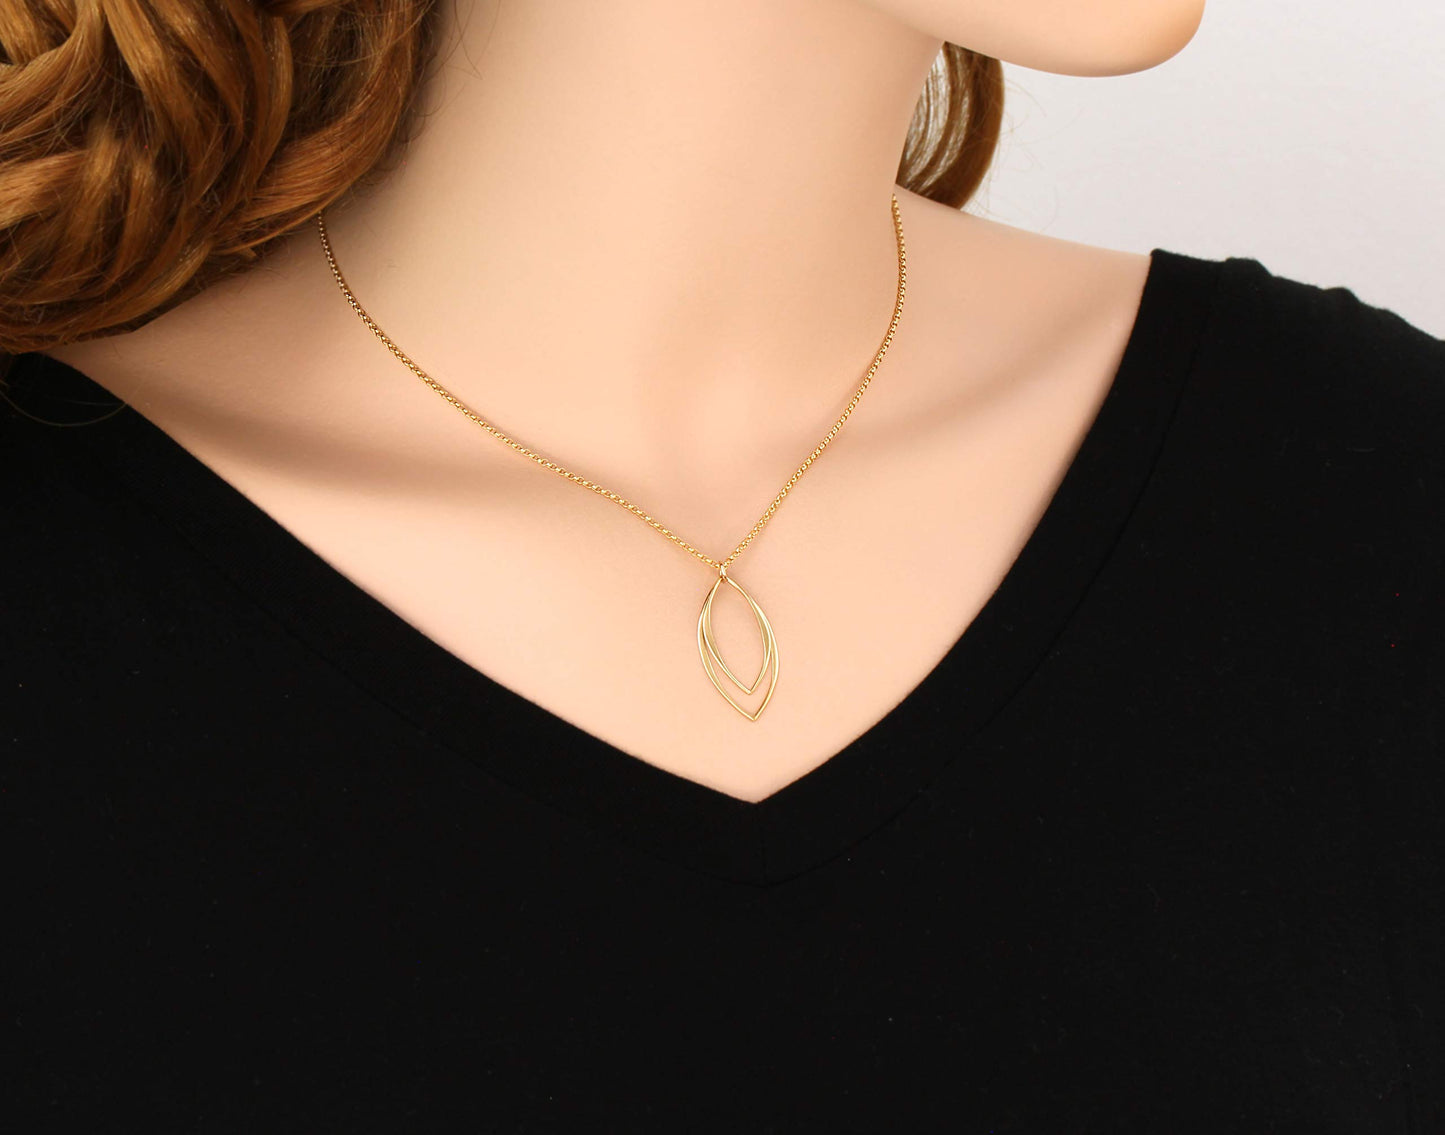 14k Gold Filled Marquise Necklace • Modern Minimalist Jewelry • Simple Delicate Pendant • Handmade Necklace • Necklaces for Women • Gifts for Teen Teenage Girl Gift • Geometric Shape • Sexy Edgy